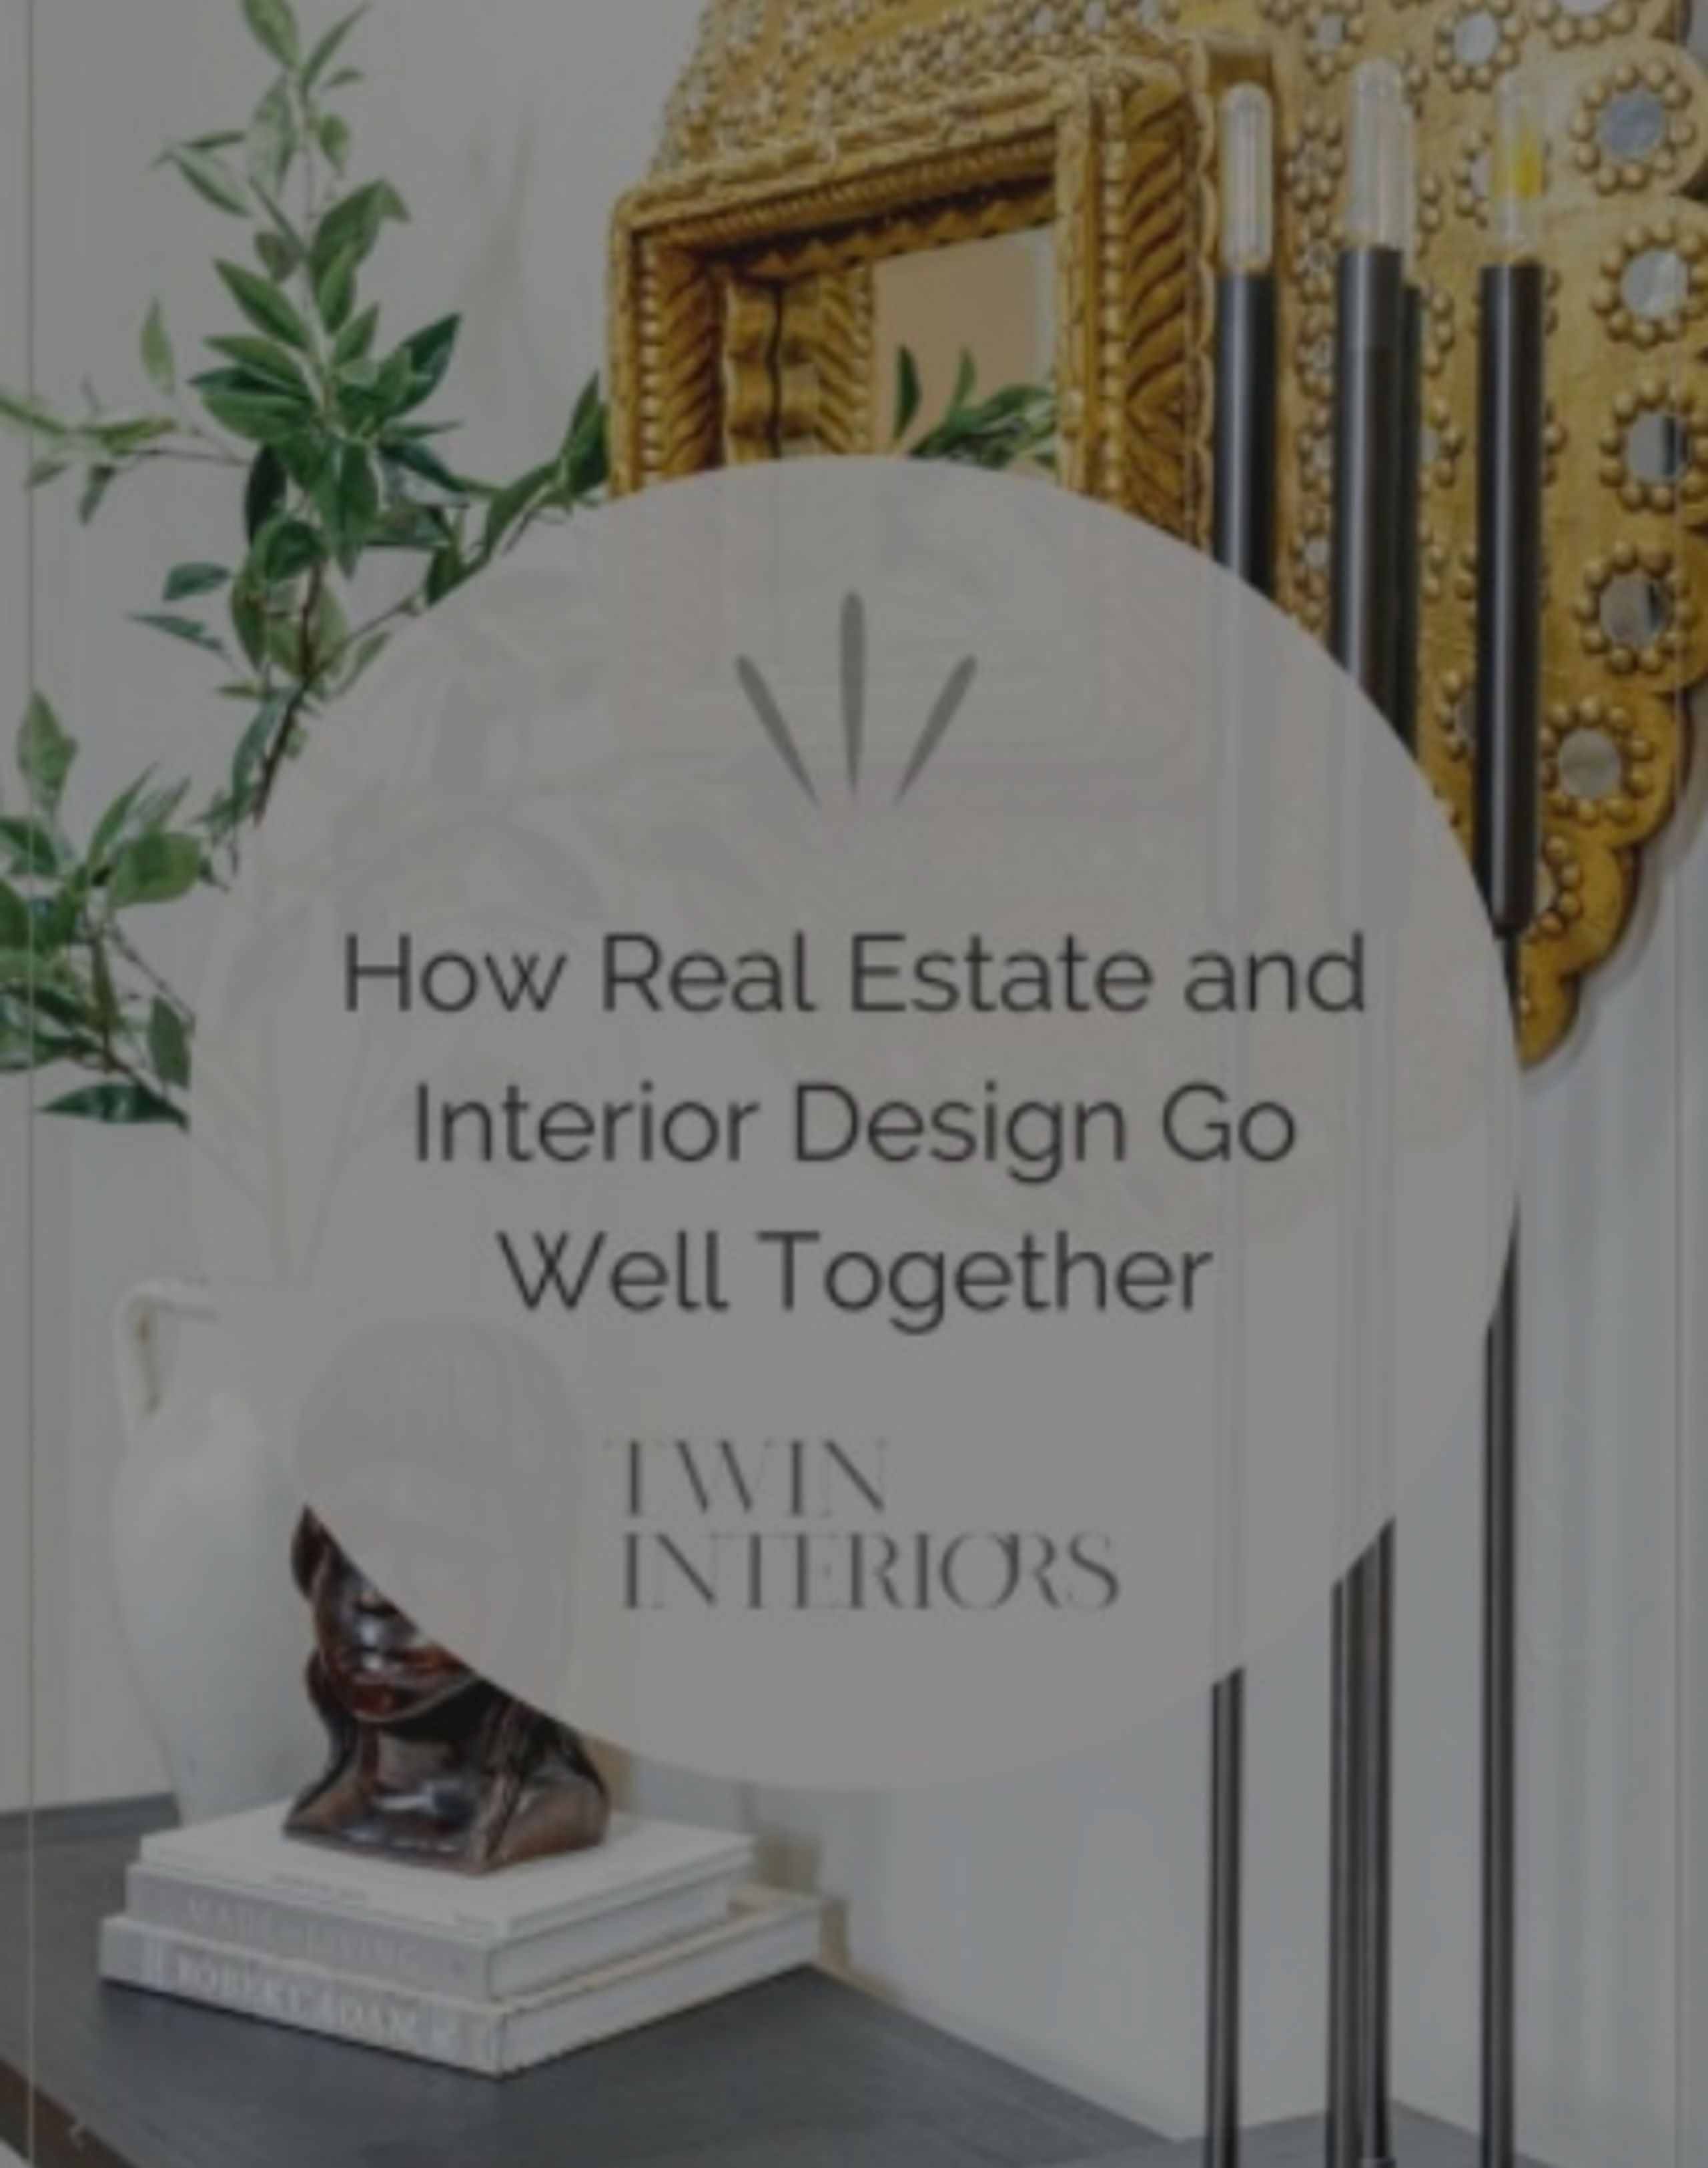 Opposites Attract: How Real Estate and Interior Design Blend Together